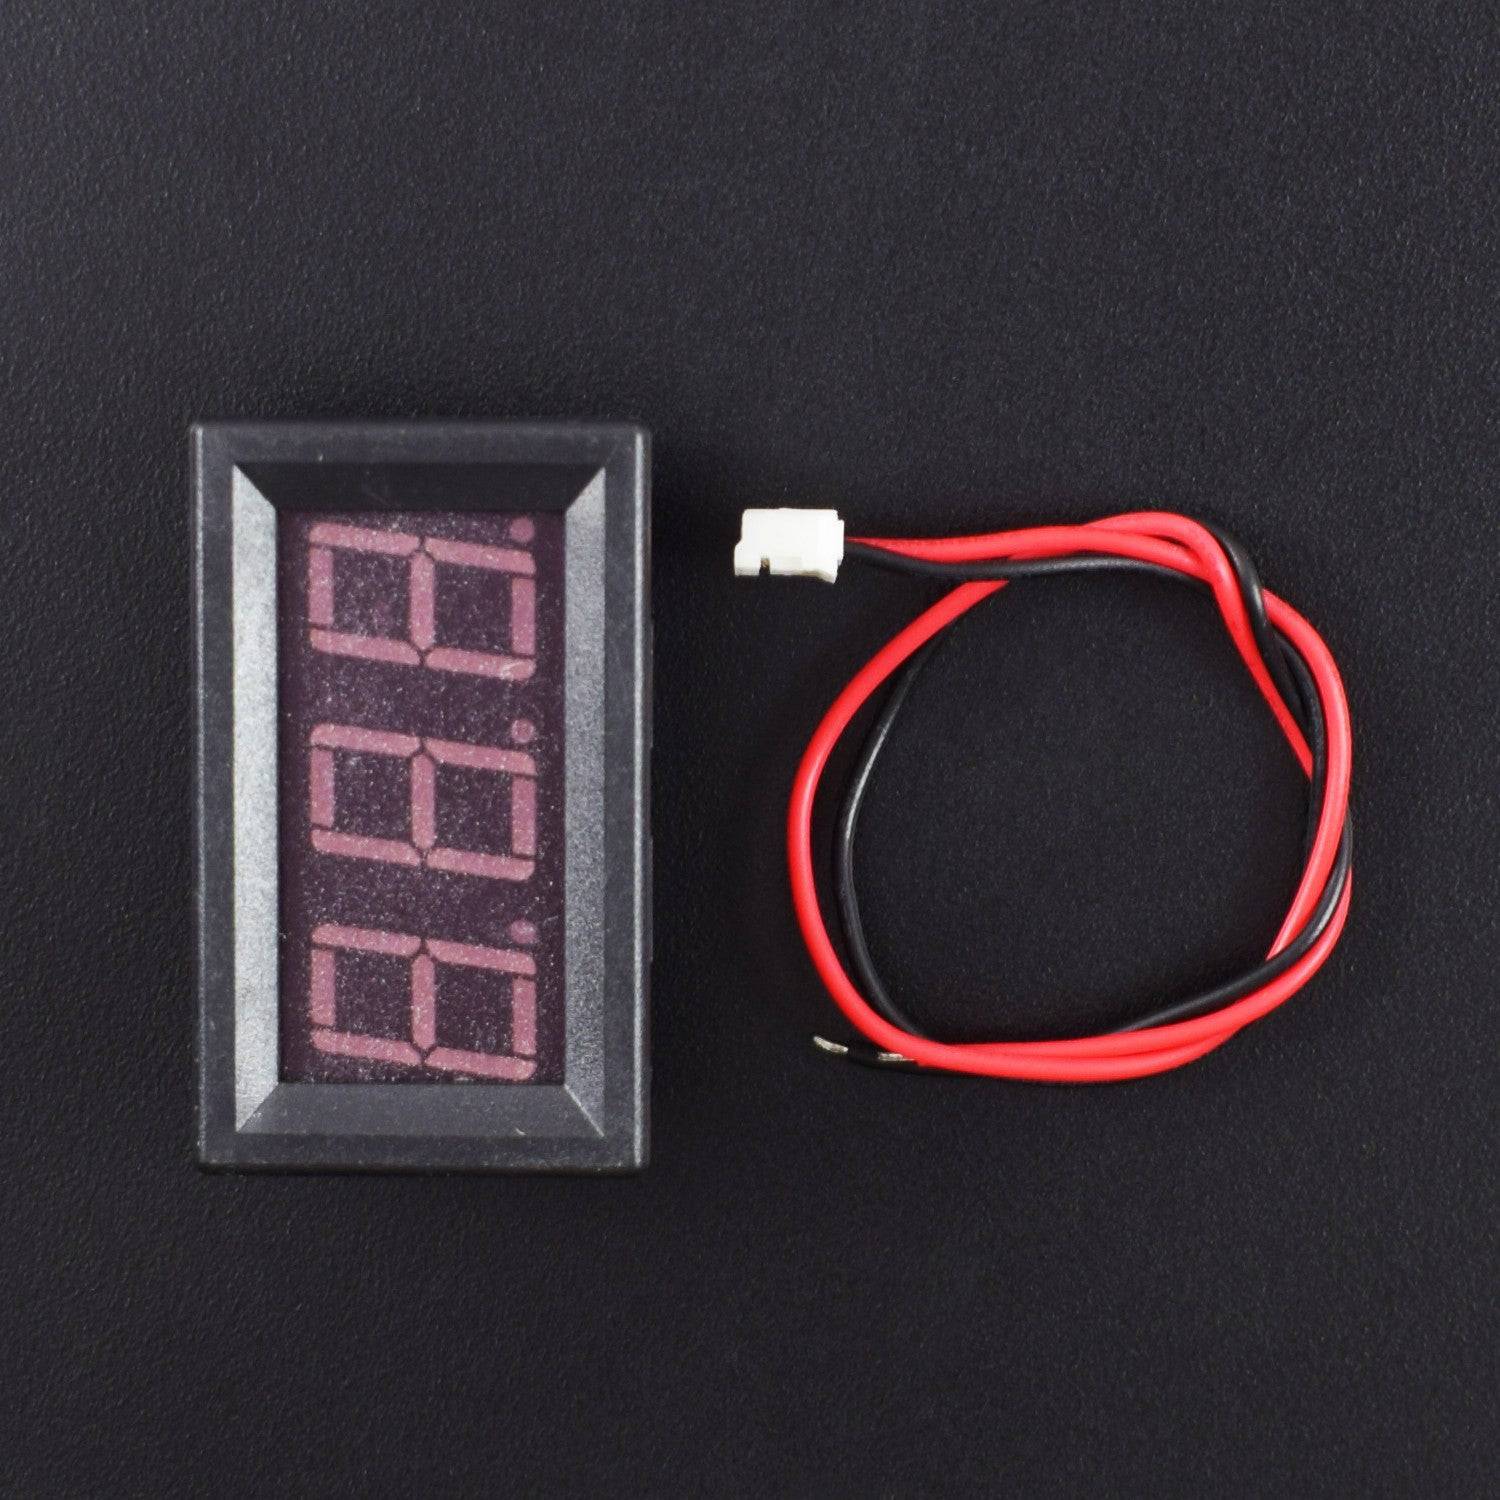 0.56 inch Digital voltmeter voltage meter tester LCD DC 3.5-30 V Red LED Panel Meter Digital Voltmeter with Two-wire - RS446 - REES52